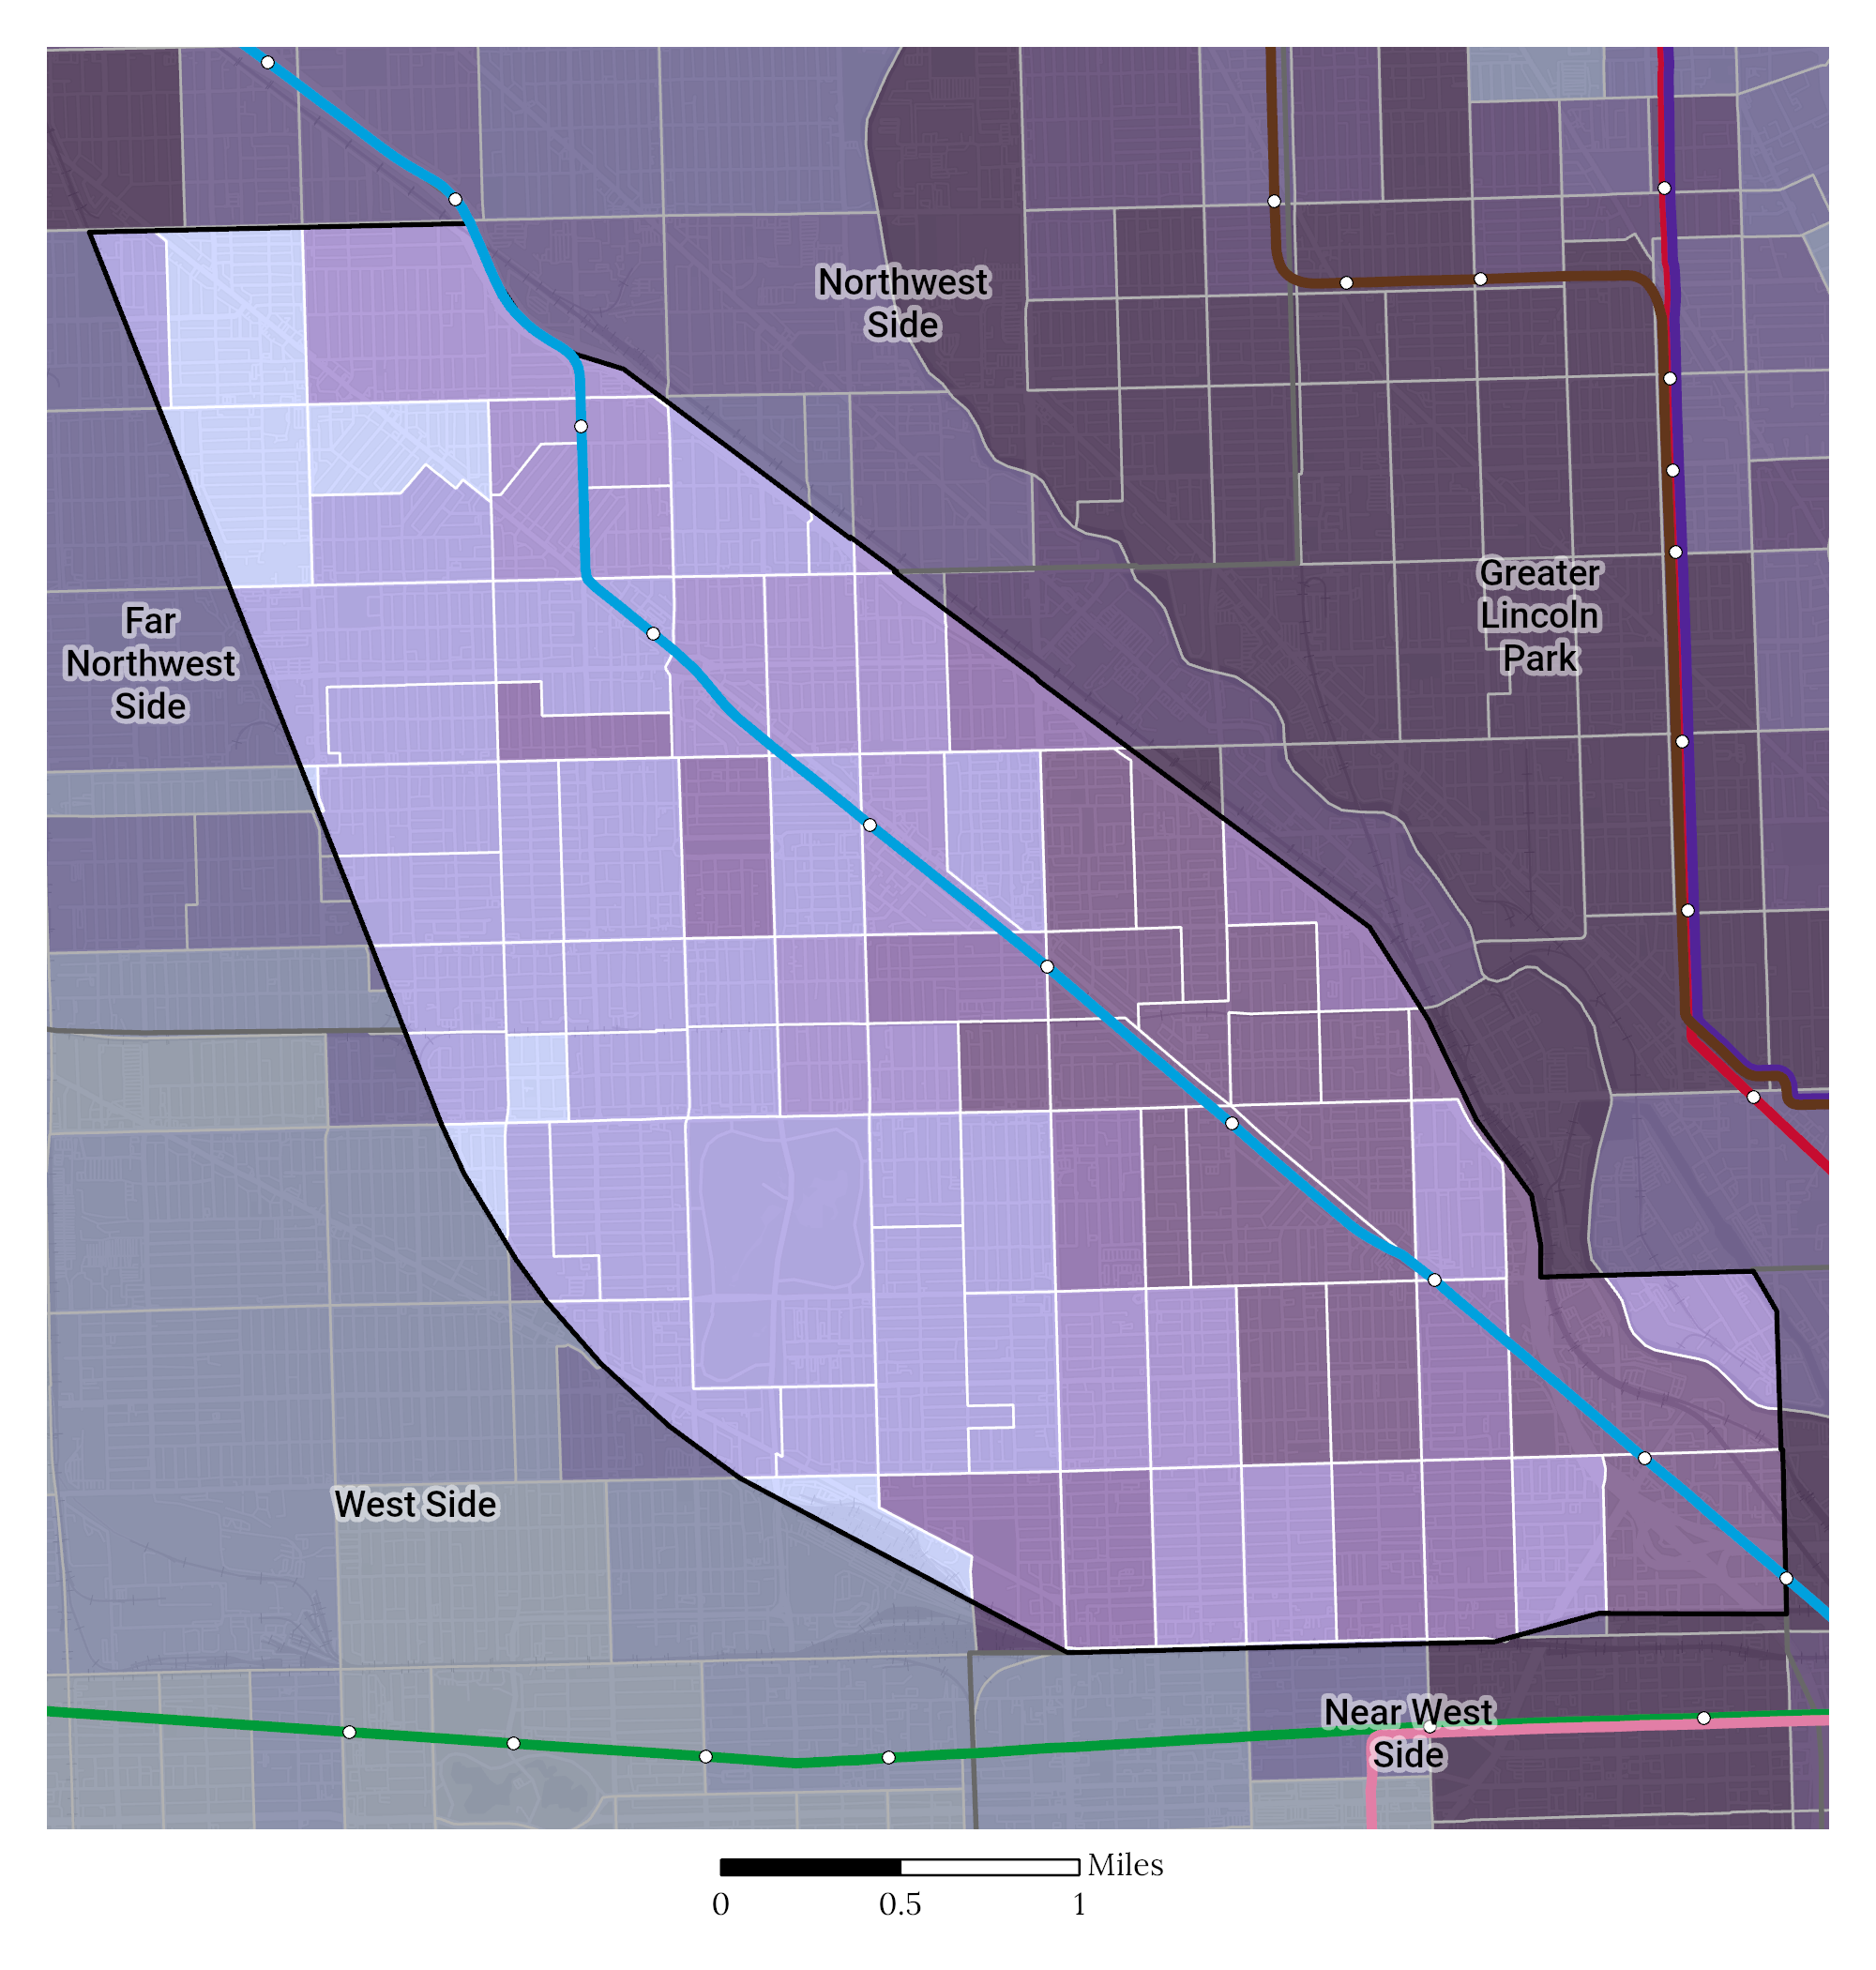 Median Household Income map of Greater Milwaukee Avenue